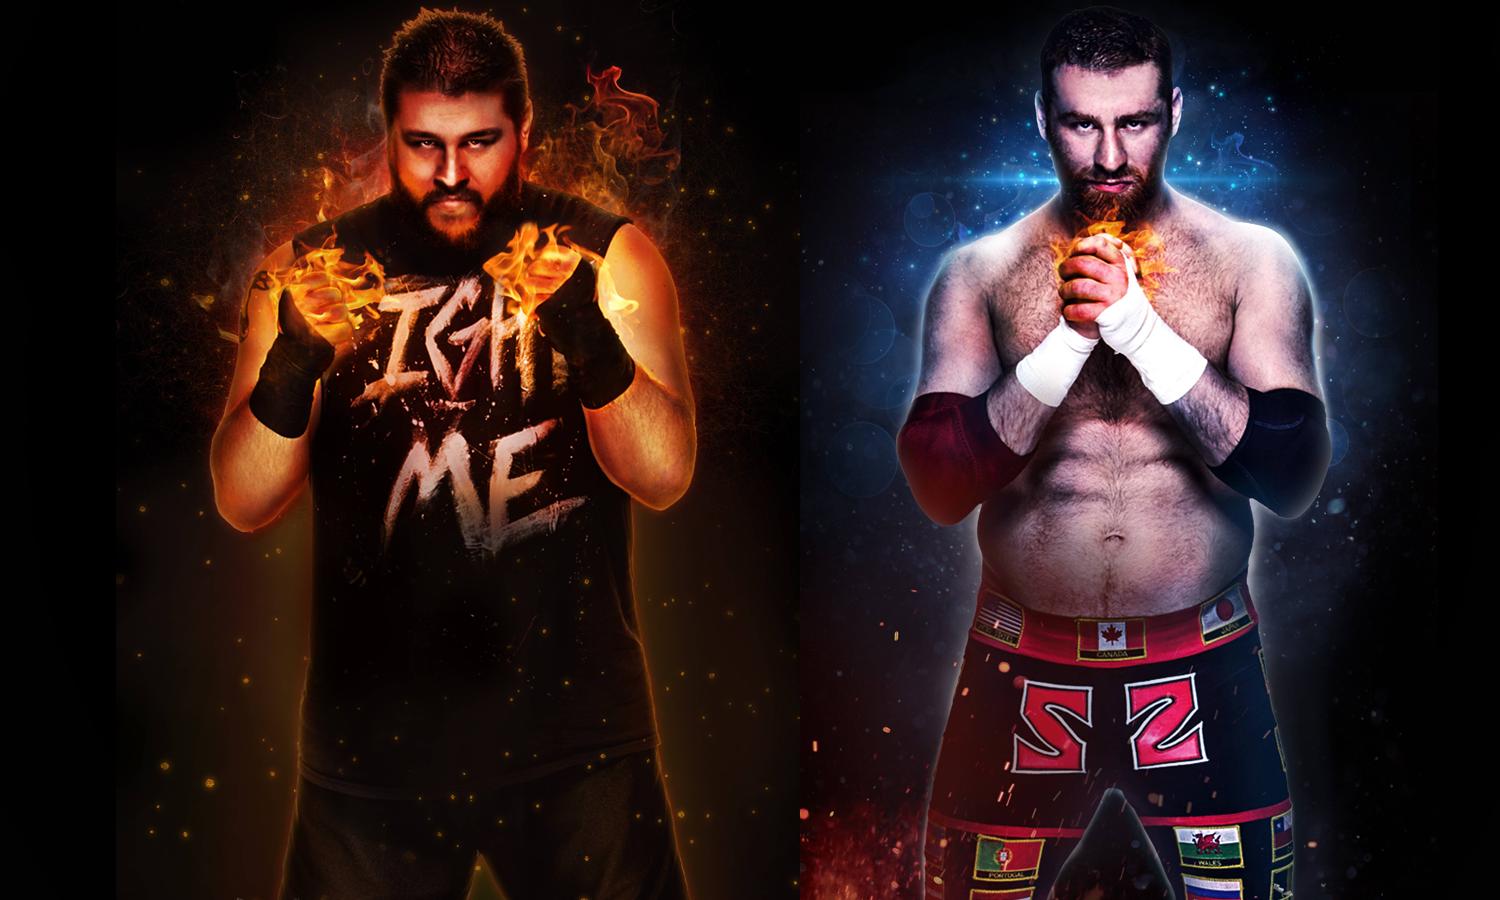 My posters for NXT Takeover: Unstoppable